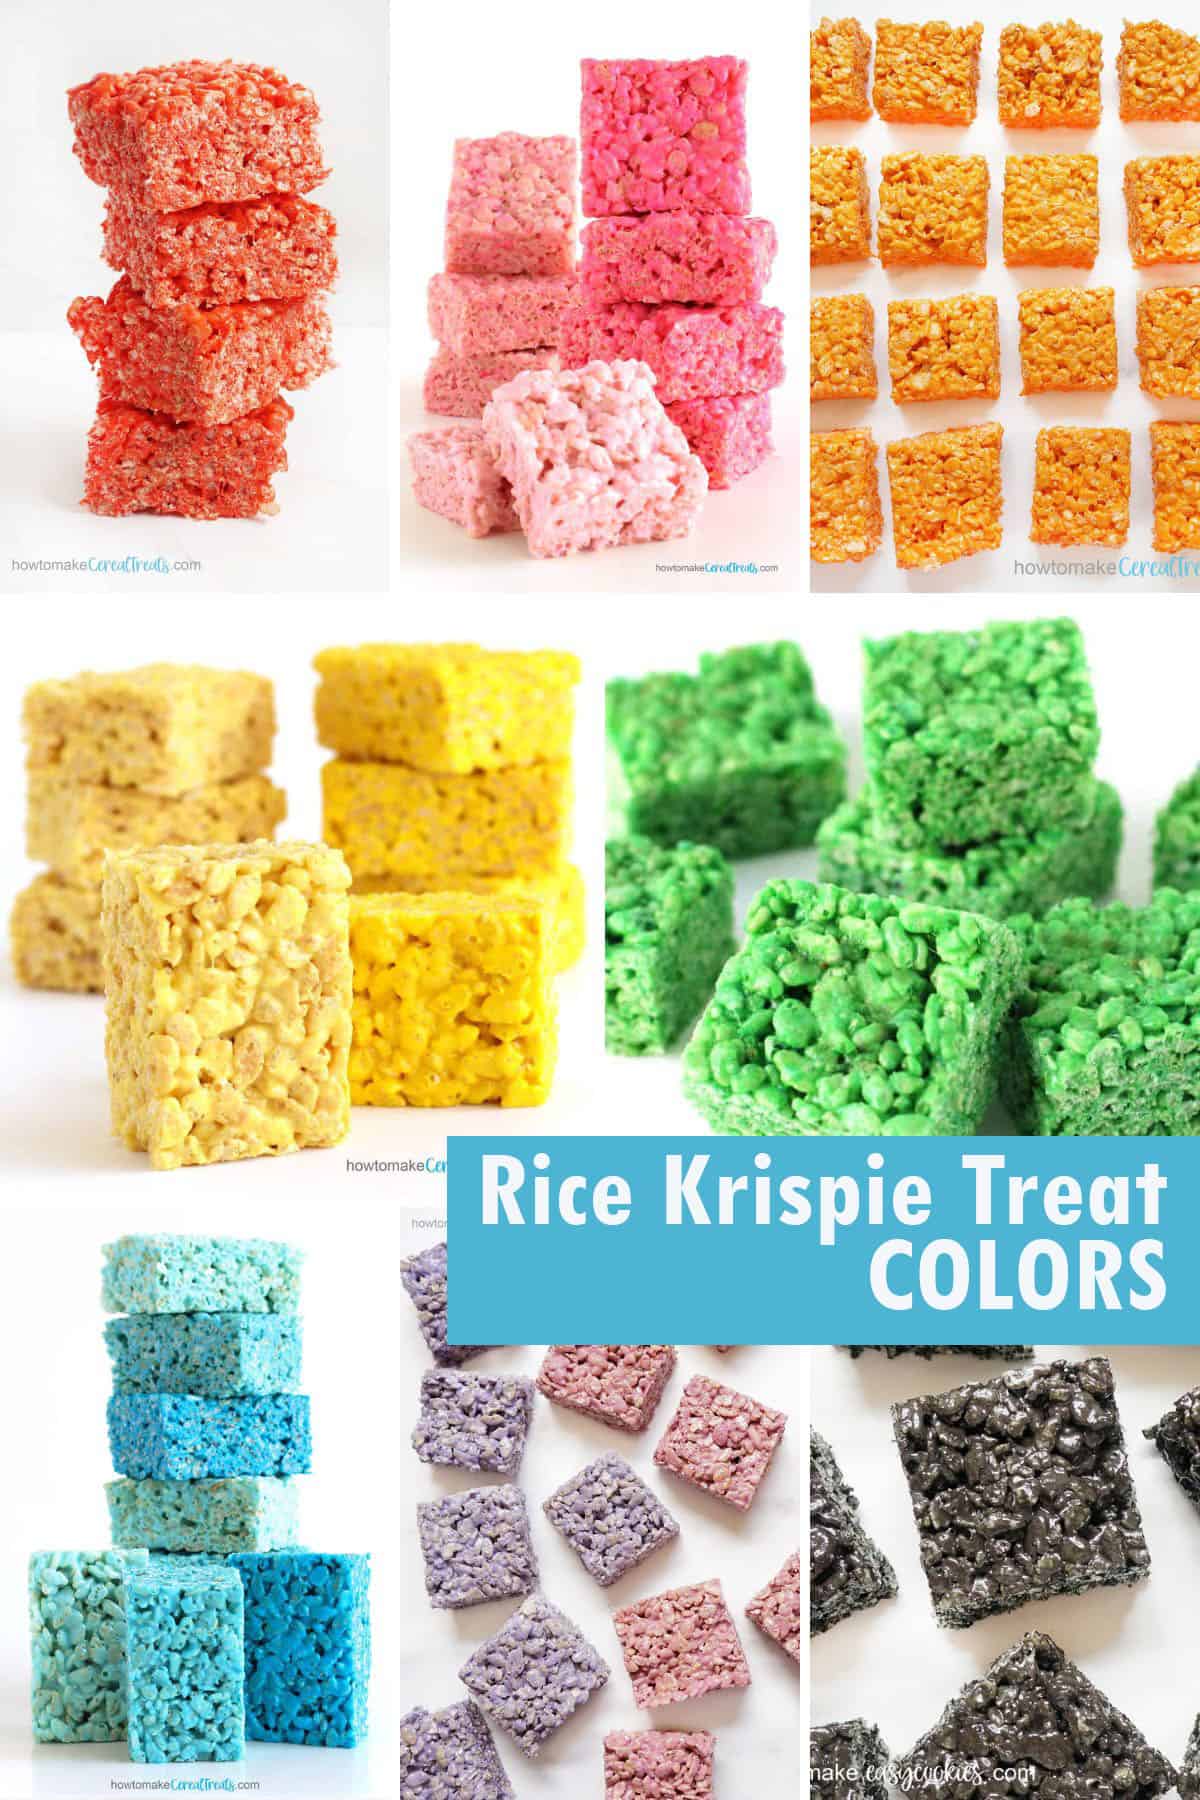 How to make colored Rice Krispie Treats in red, pink. orange, yellow, green, blue, purple, and black